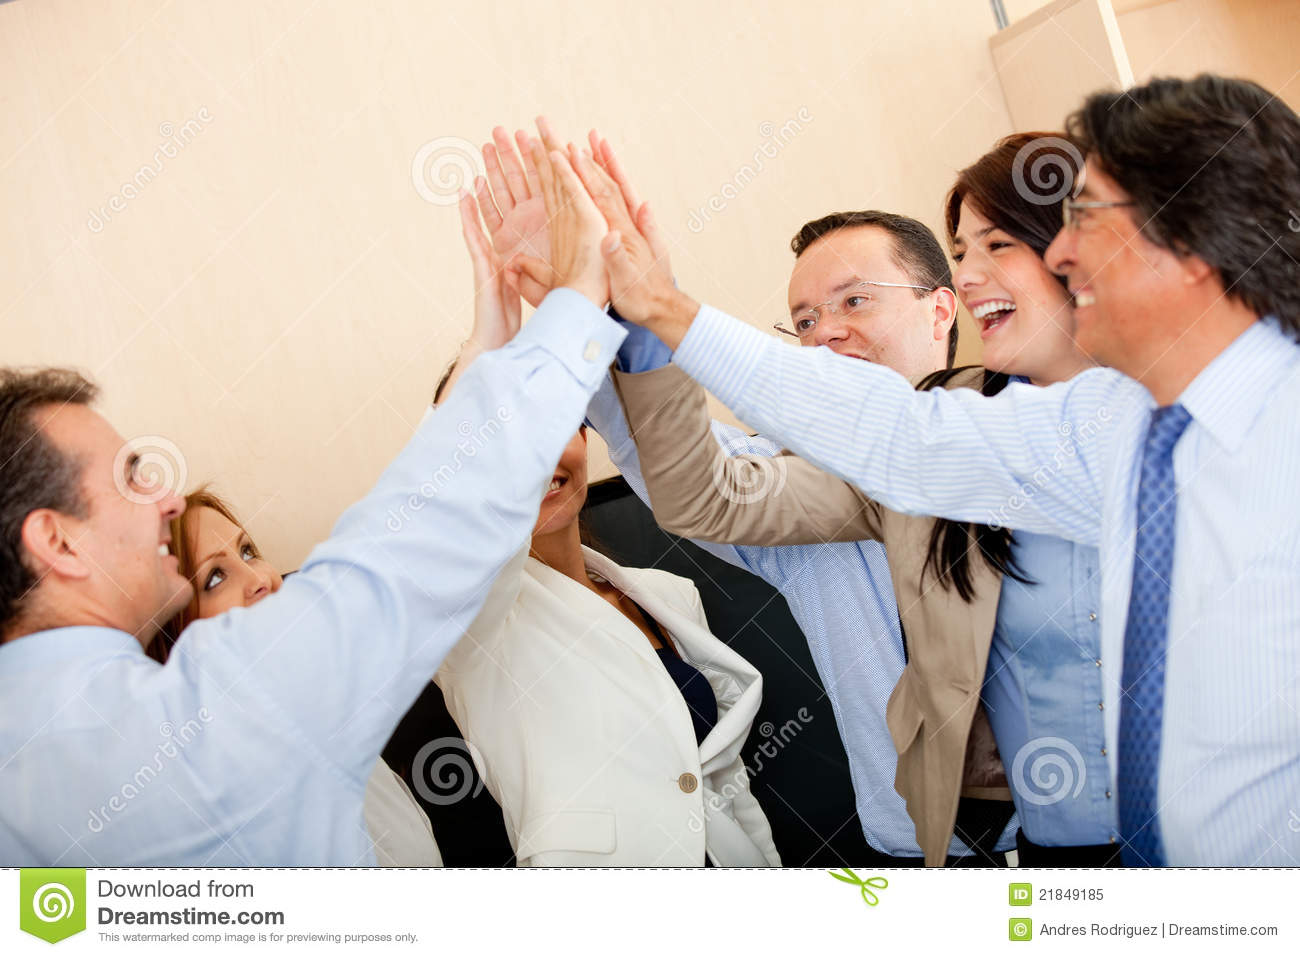 Business High Five Royalty Free Stock Photo   Image  21849185